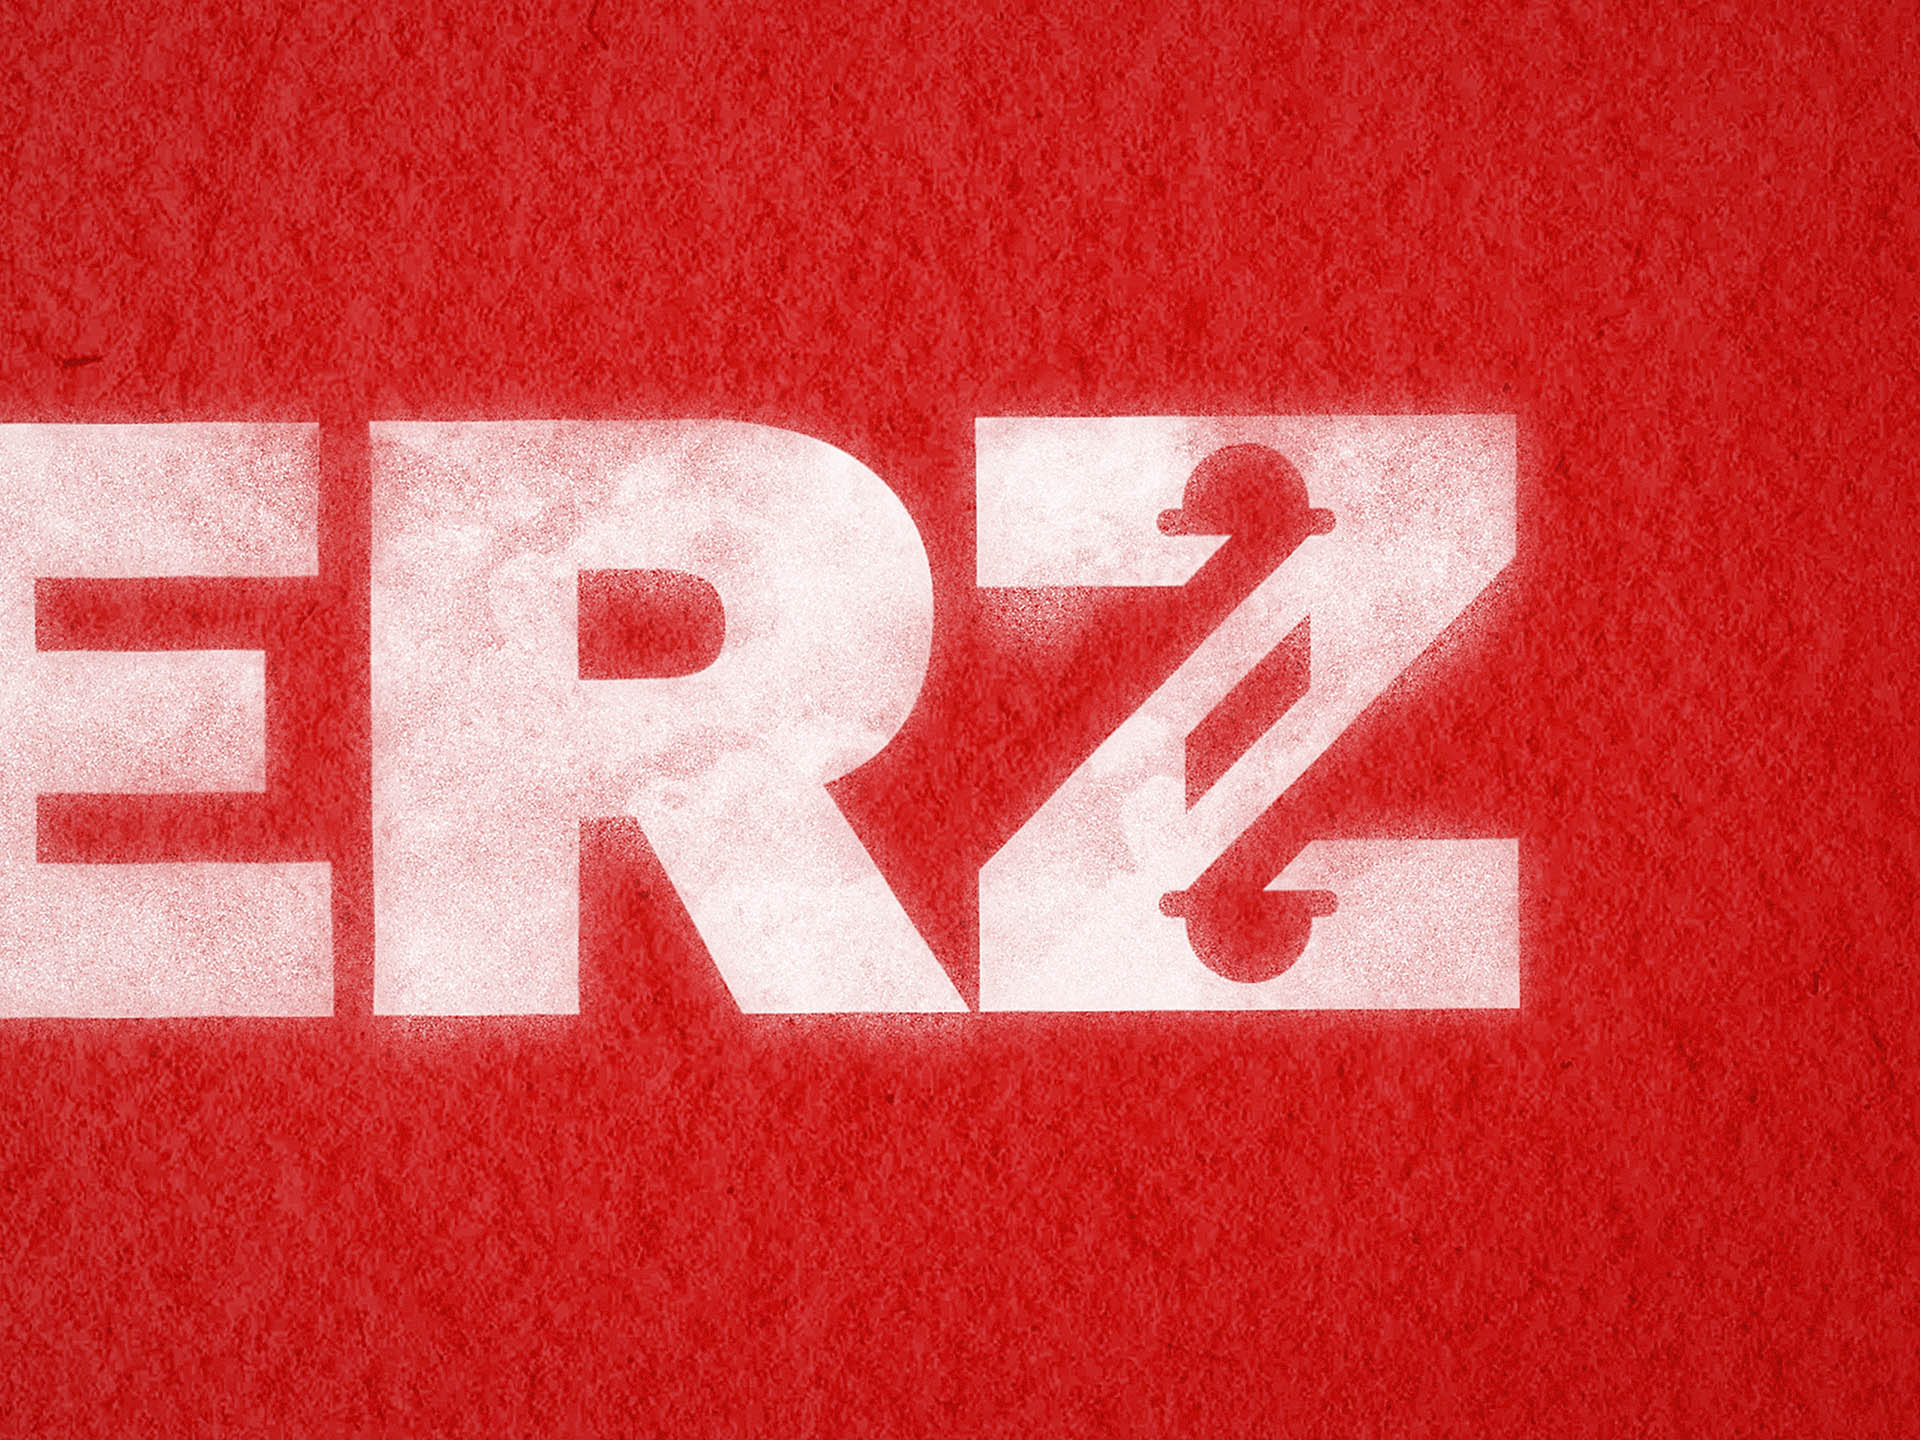 A close up of monogram Z at the end of the name BARBERZ.